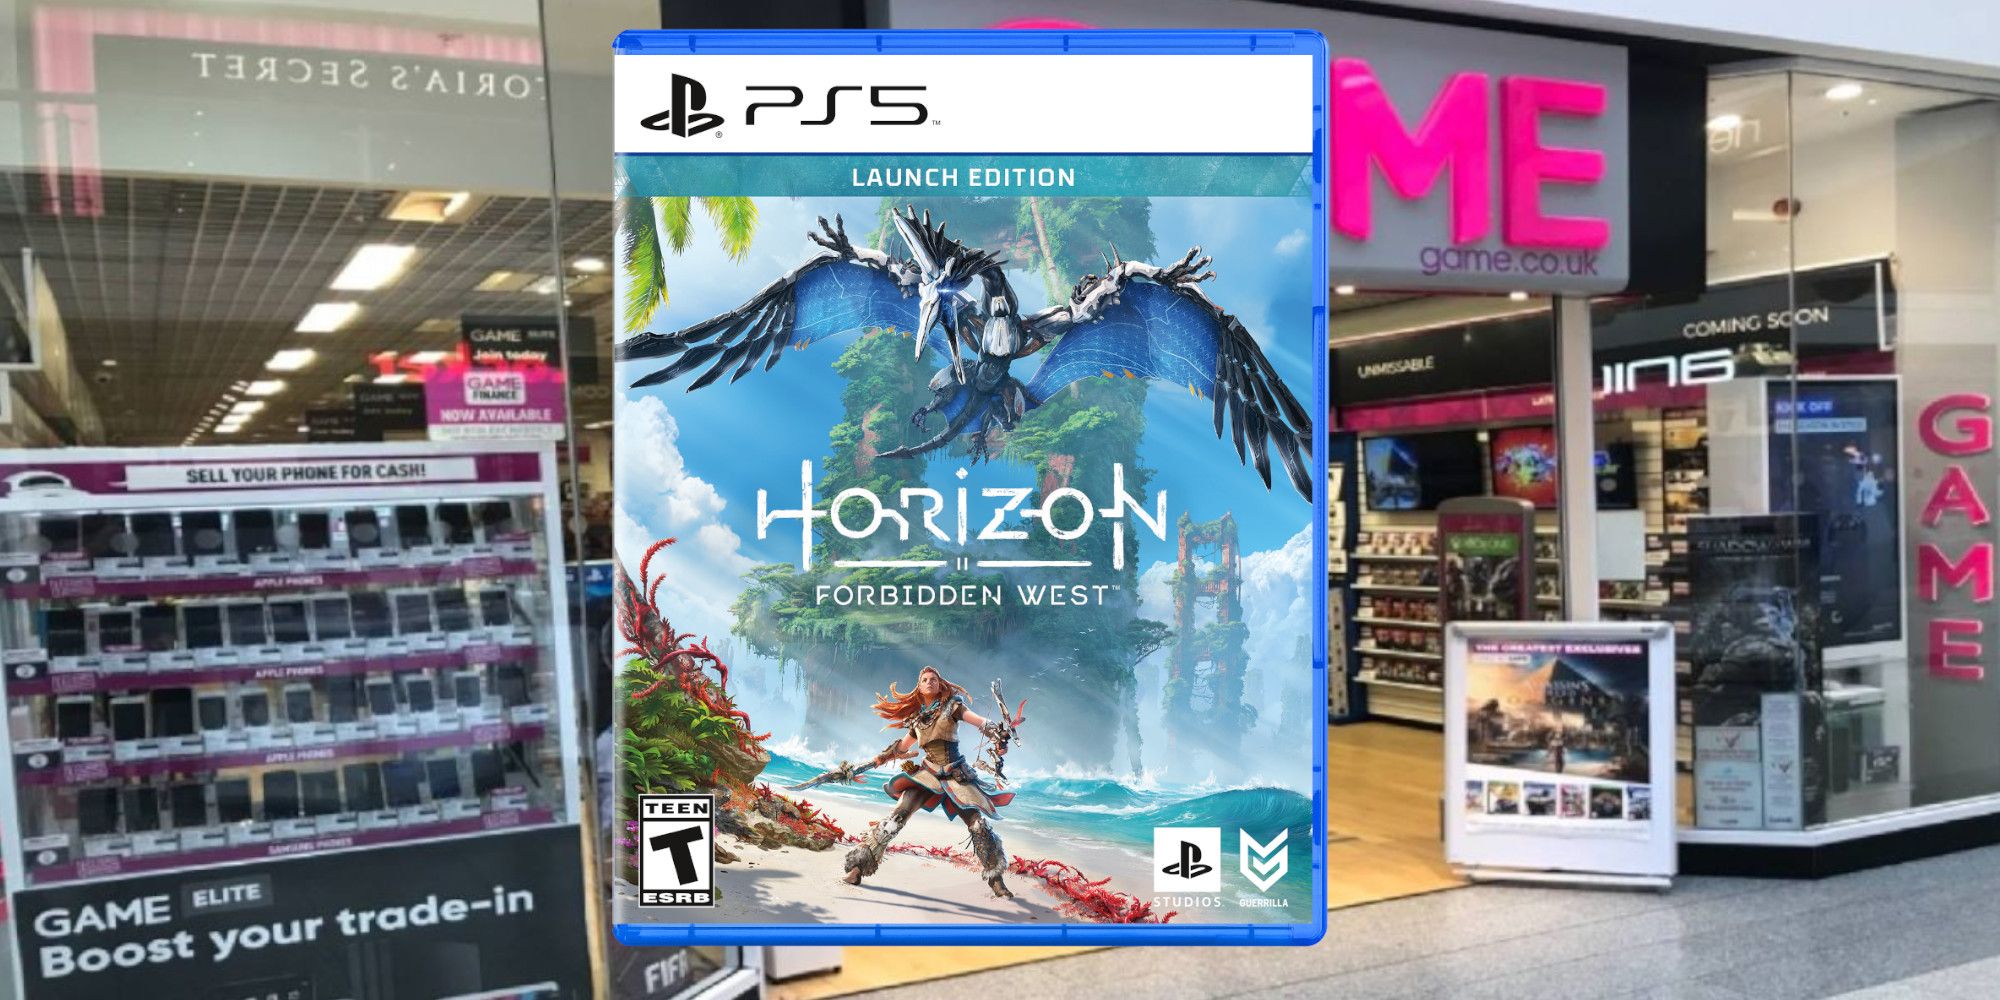 Buy Horizon Forbidden West on PS4, even if you want the PS5 version